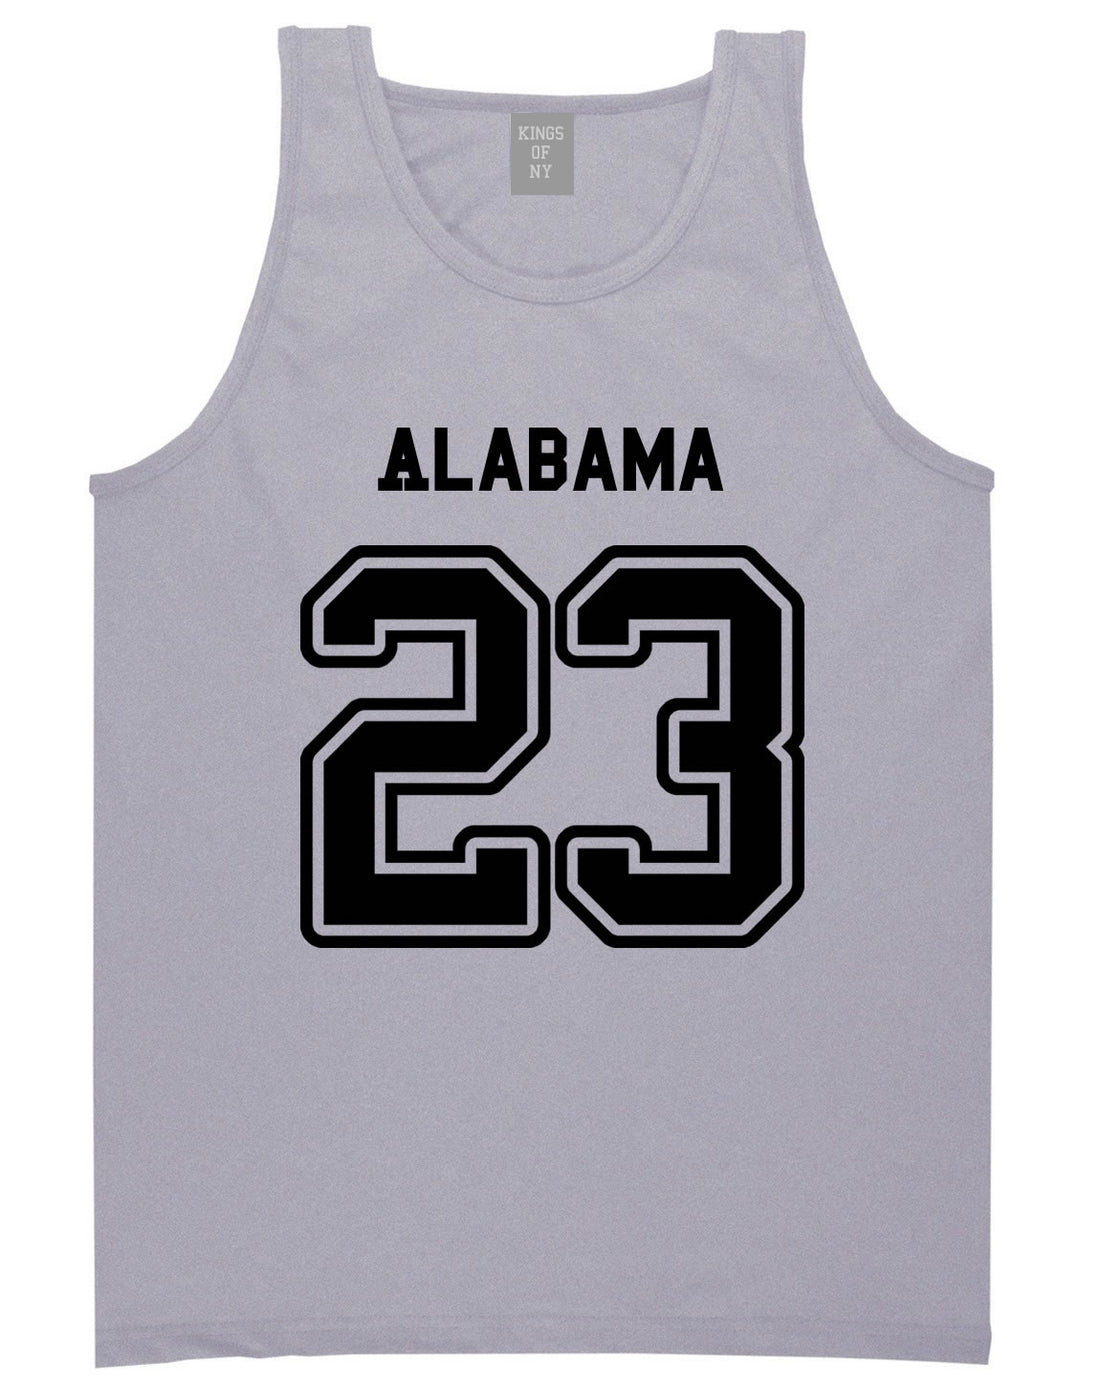 Sport Style Alabama 23 Team State Jersey Mens Tank Top By Kings Of NY